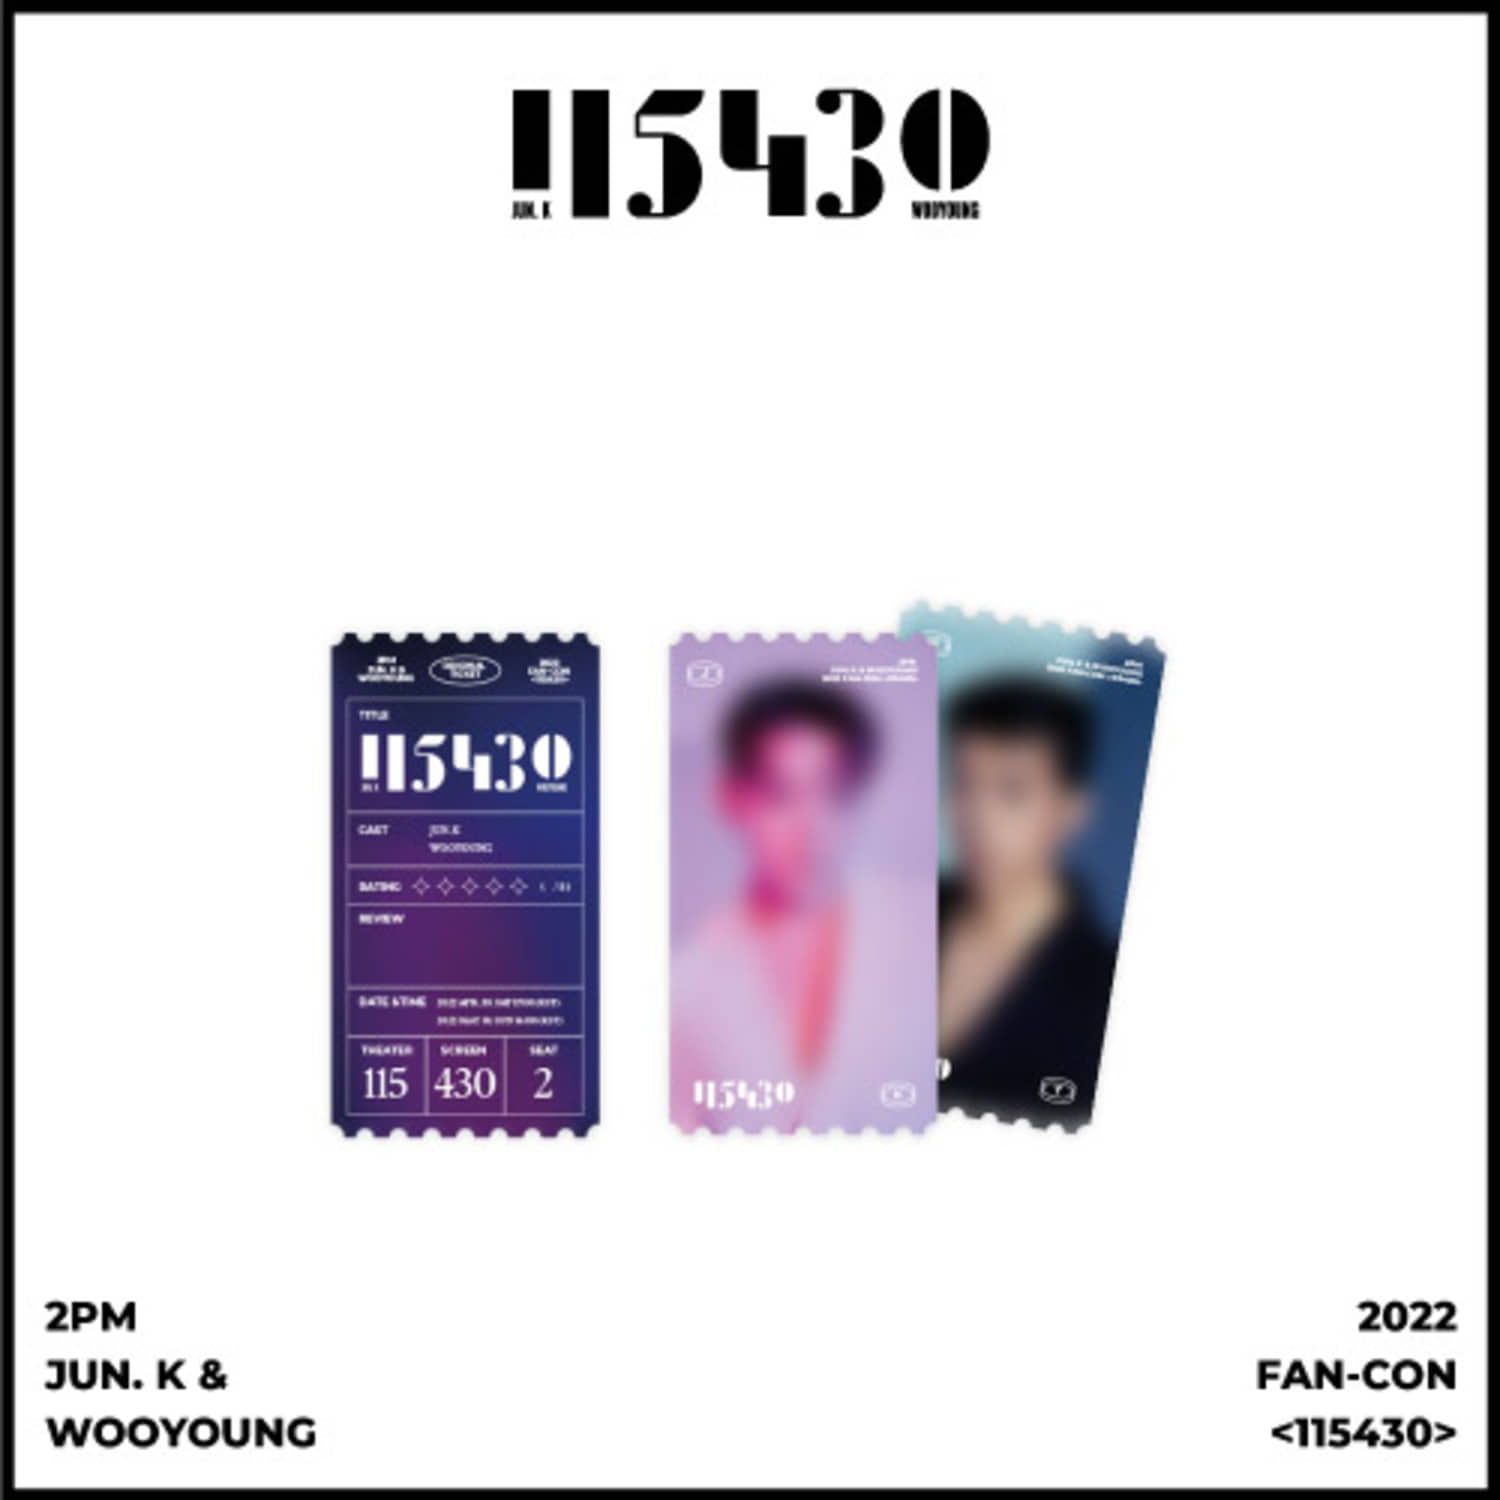 2PM JUN. K &amp; WOOYOUNG 2022 FAN-CON [115430] OFFICIAL GOODS 스페셜 티켓 SPECIAL TICKET